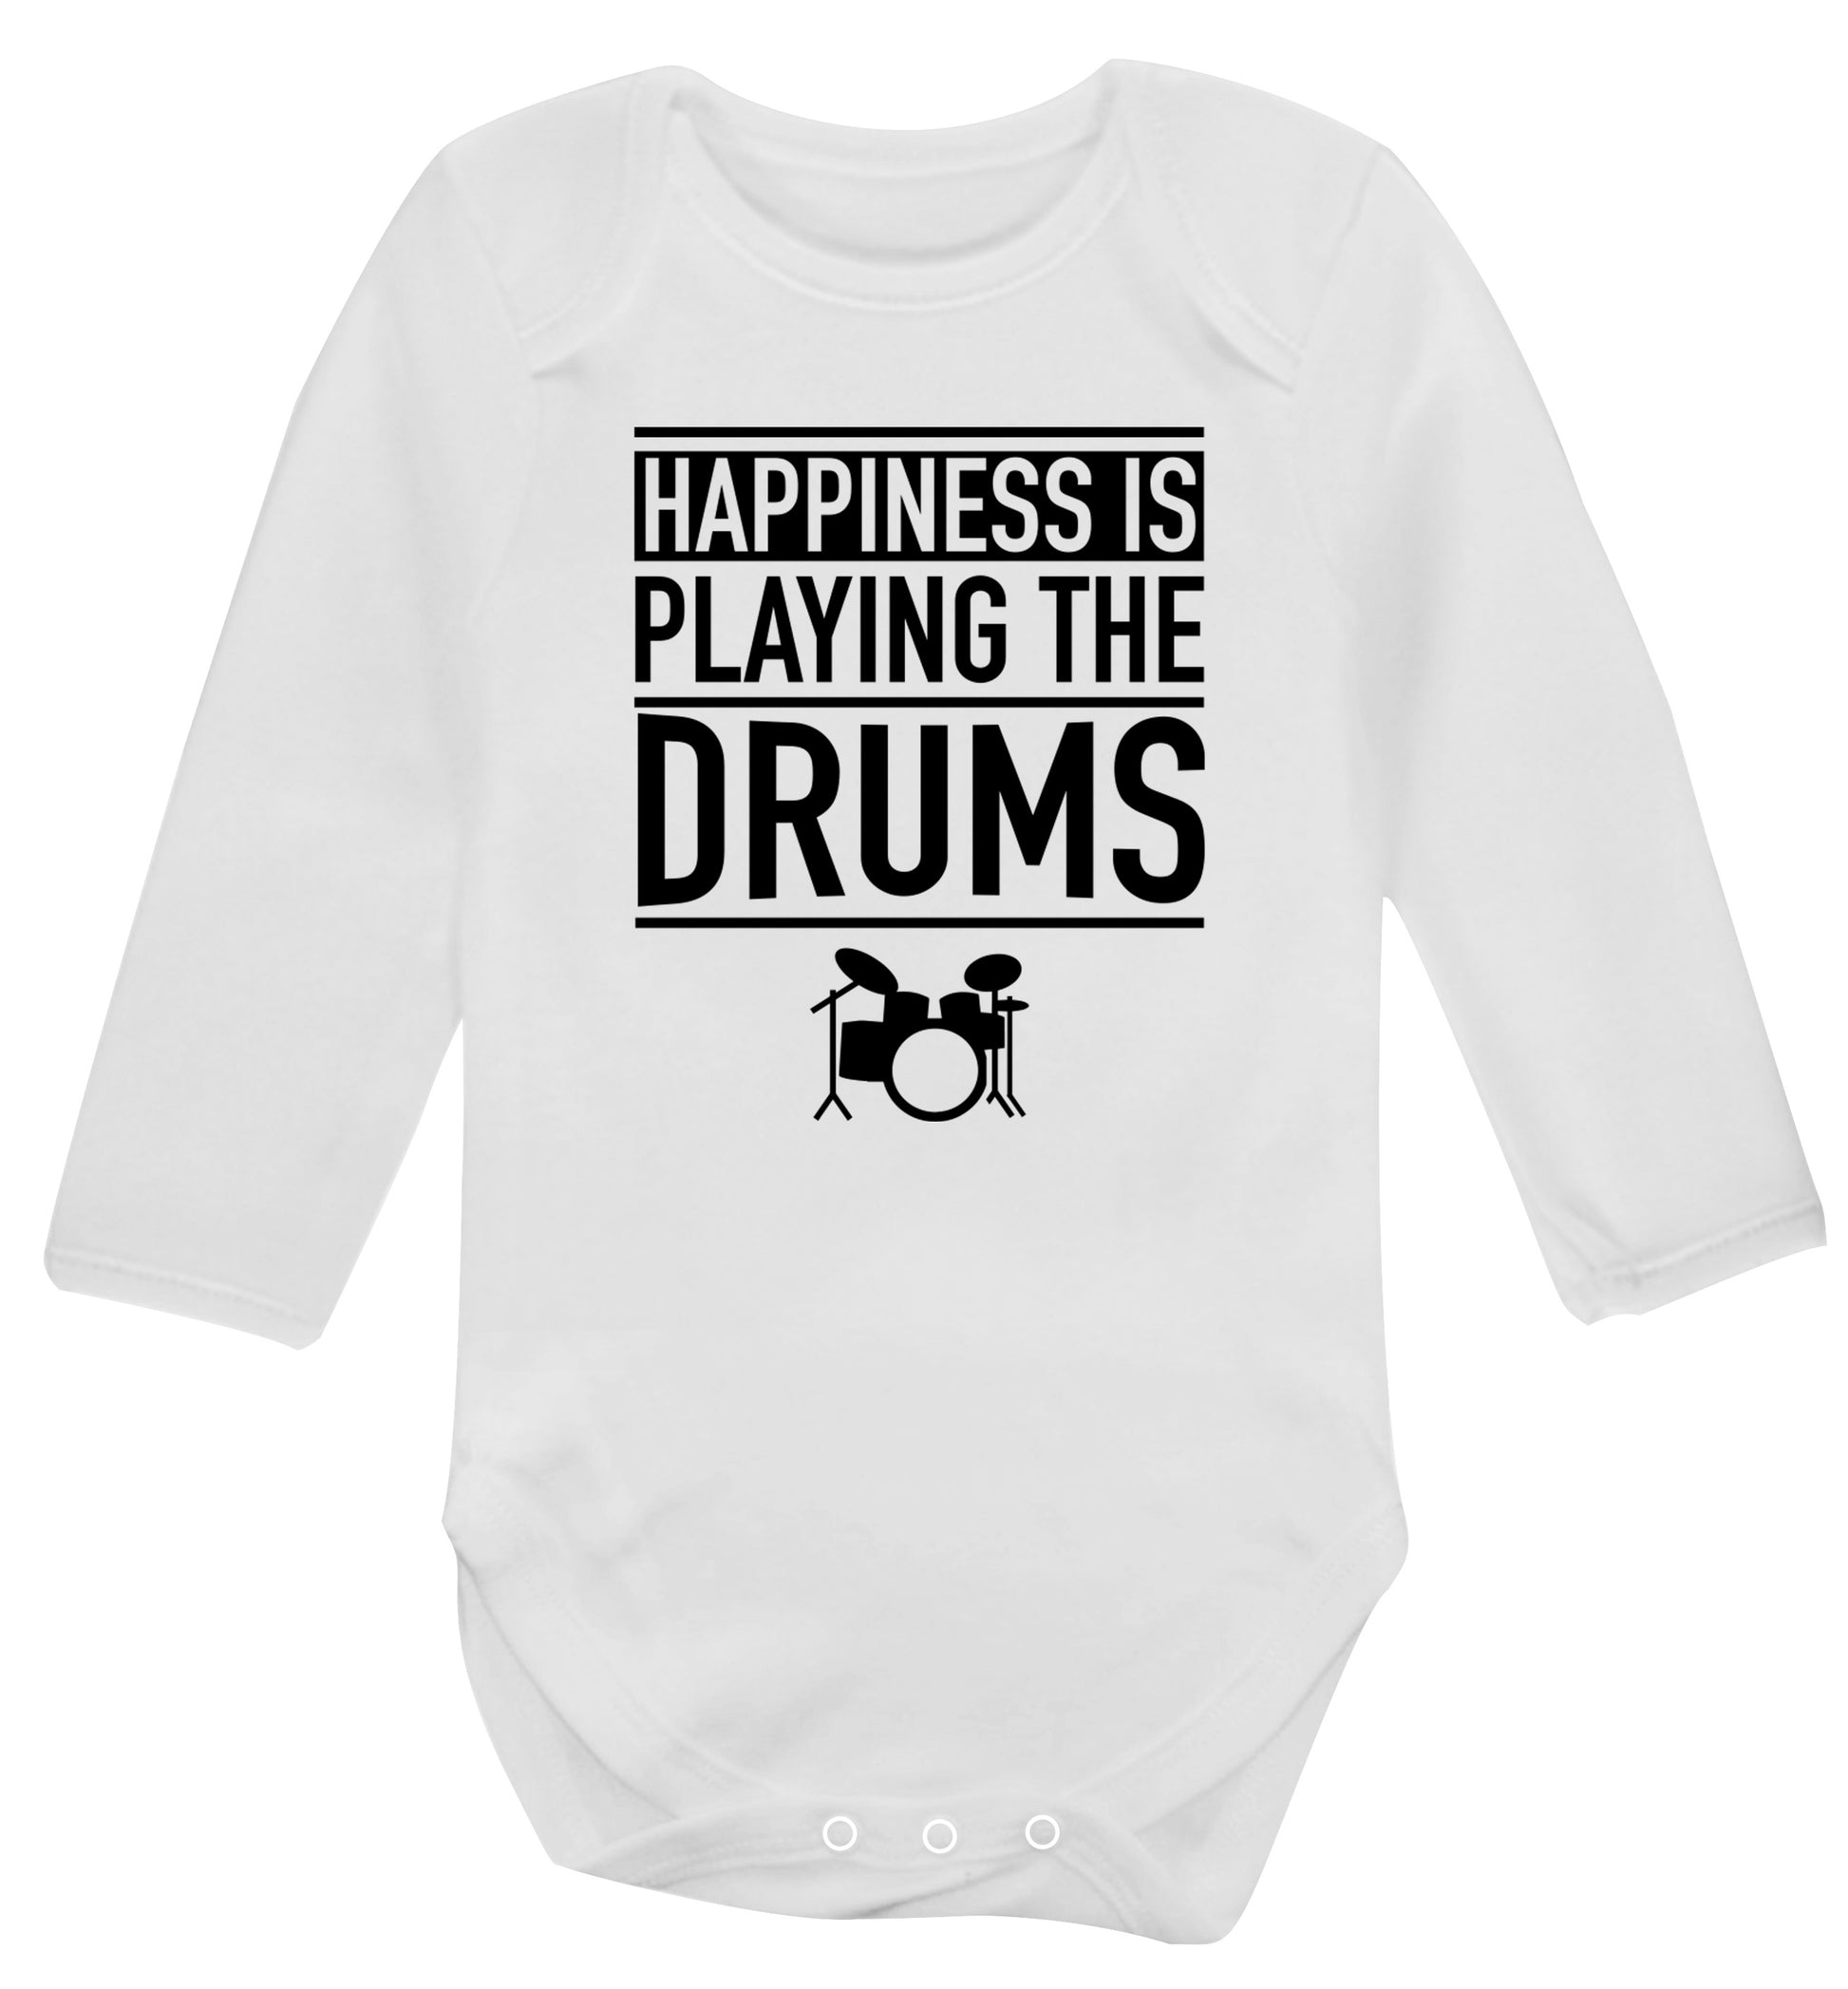 Happiness is playing the drums Baby Vest long sleeved white 6-12 months